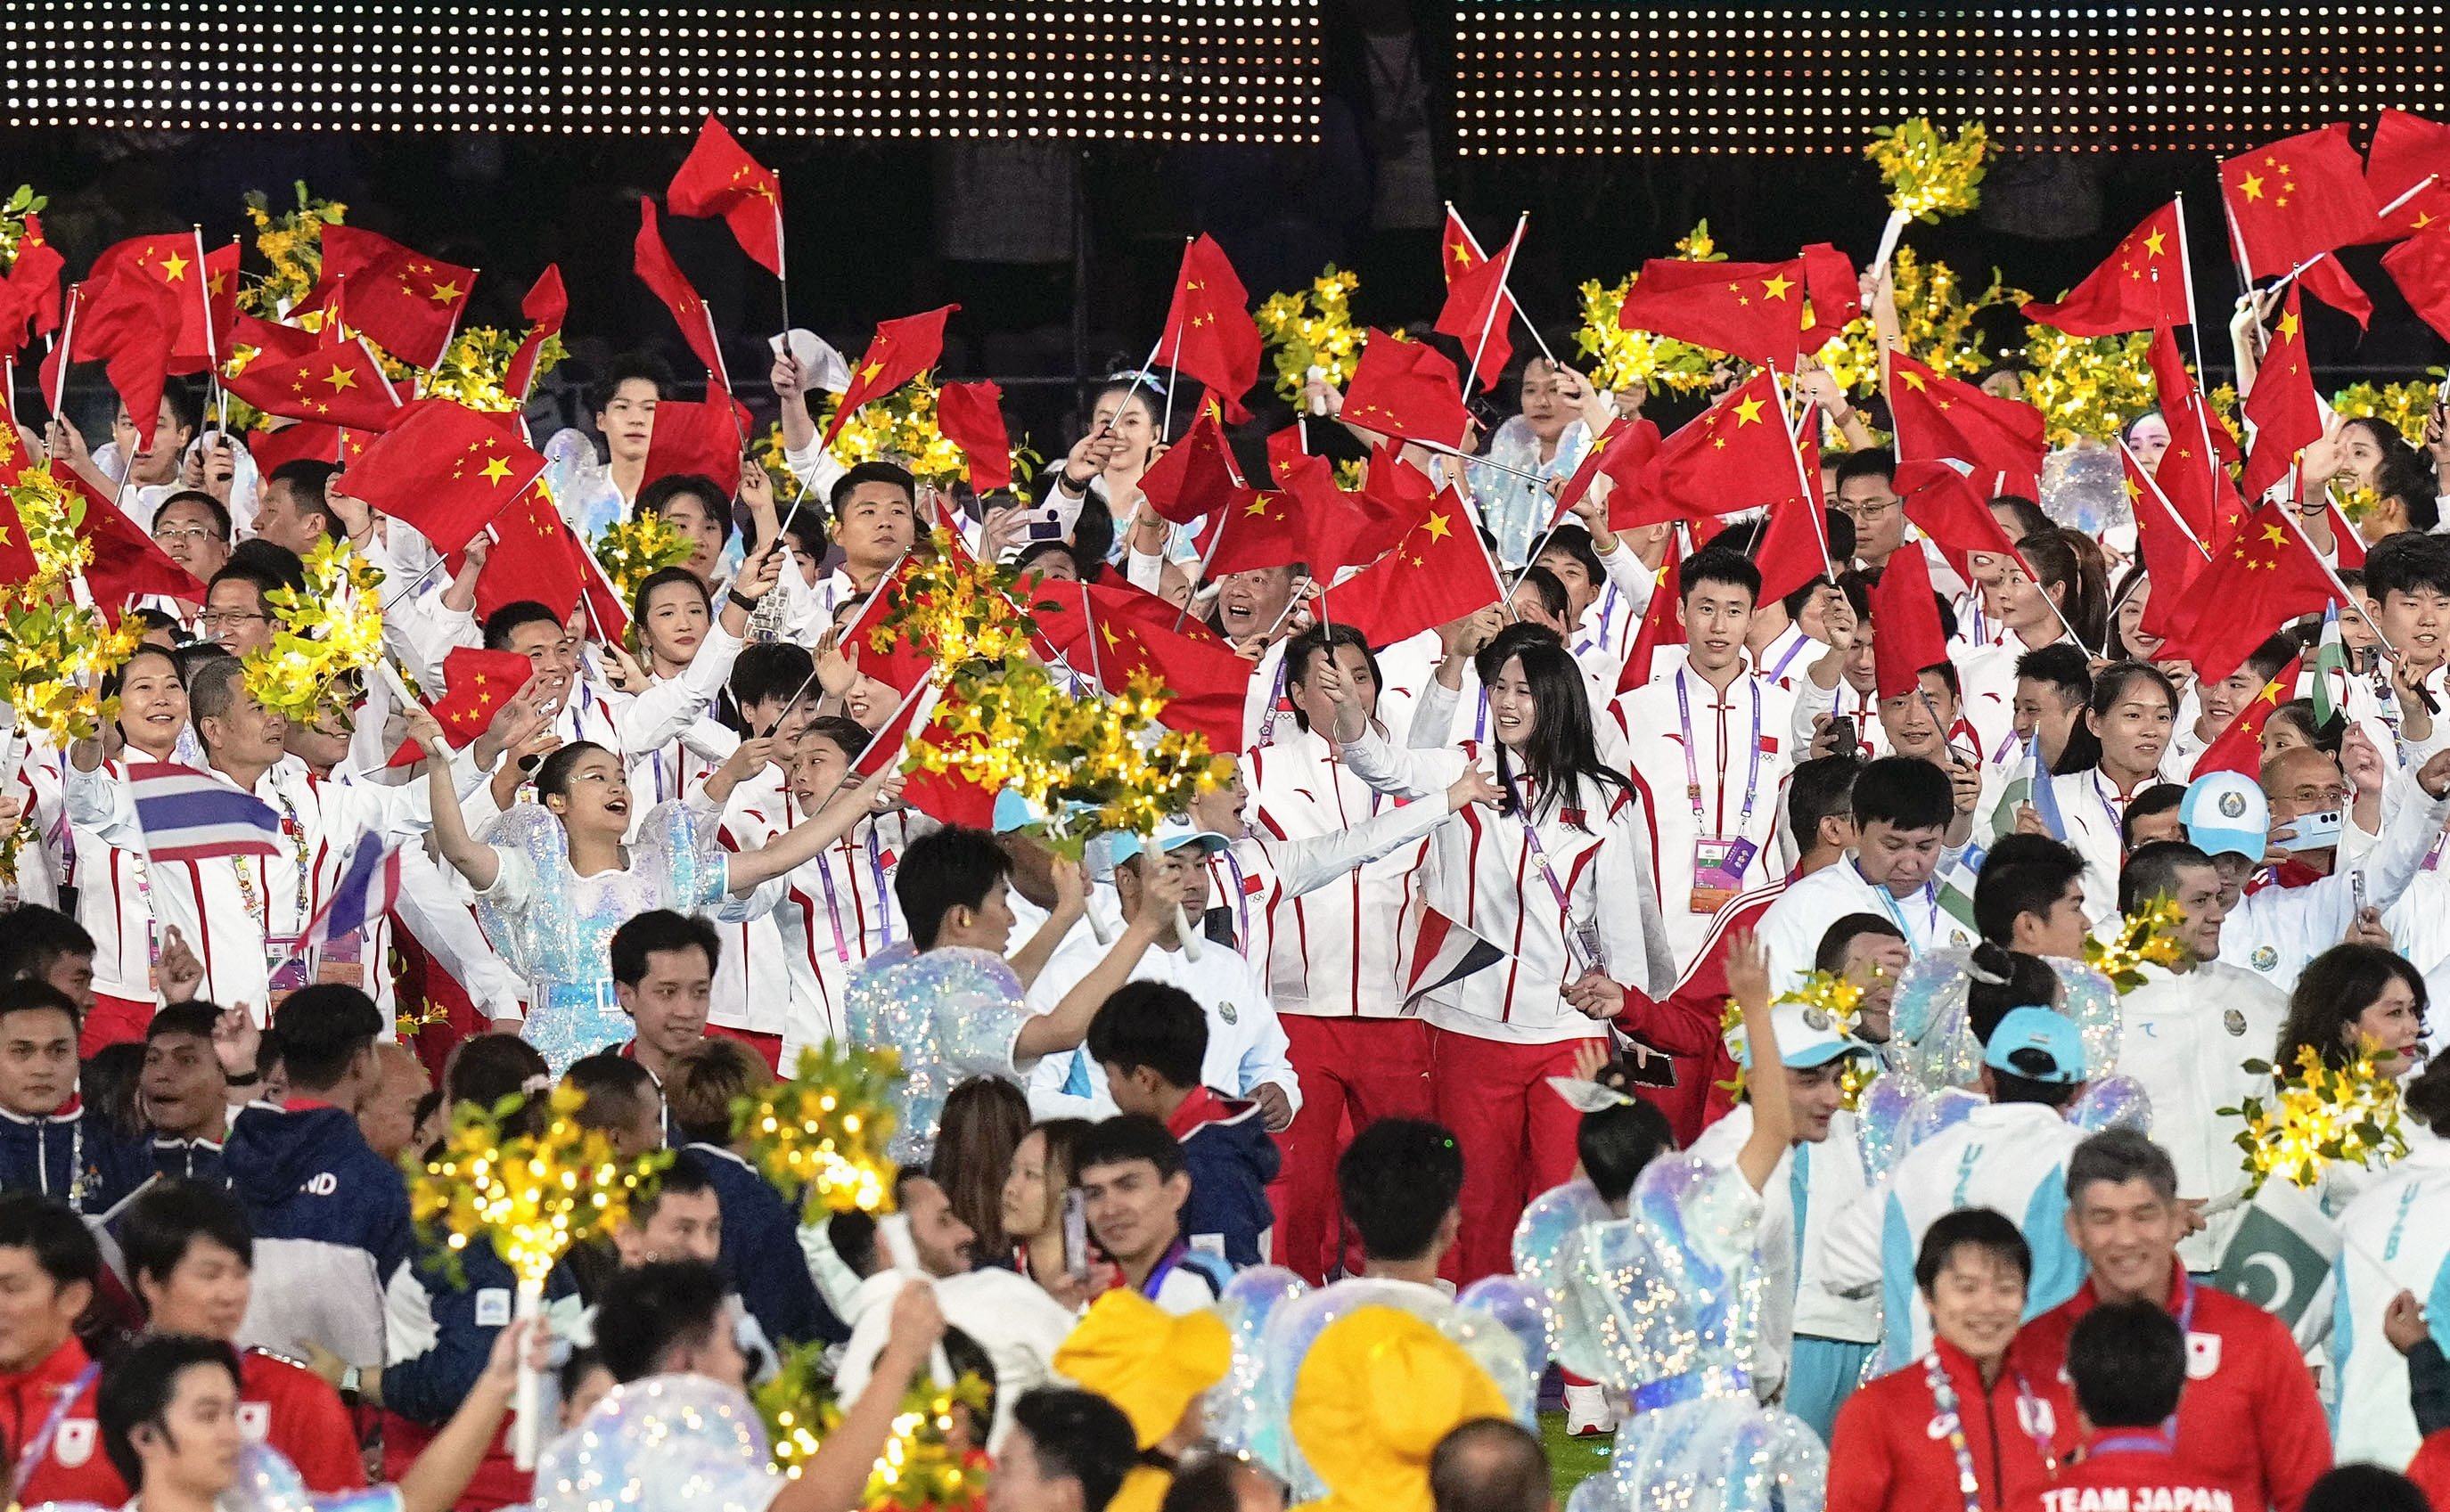 In this issue of the Global Impact newsletter, we look back at events at the Asian Games in Hangzhou, which included a series of firsts, including esports making its debut as a medal event. Photo: Kyodo